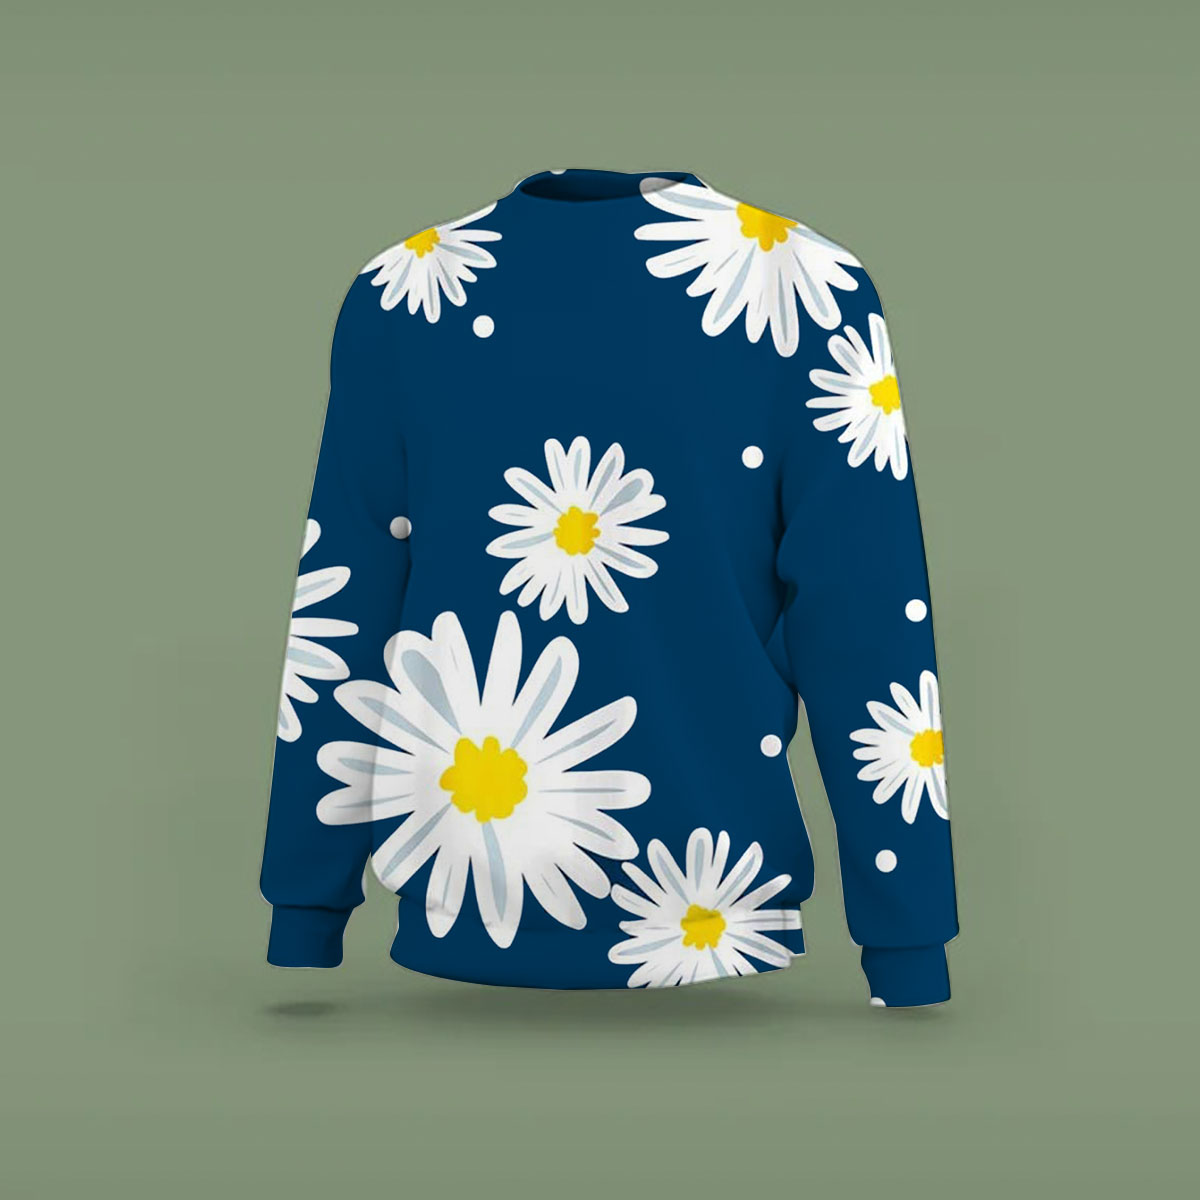 Abstract Daisy With Blue Sweatshirt